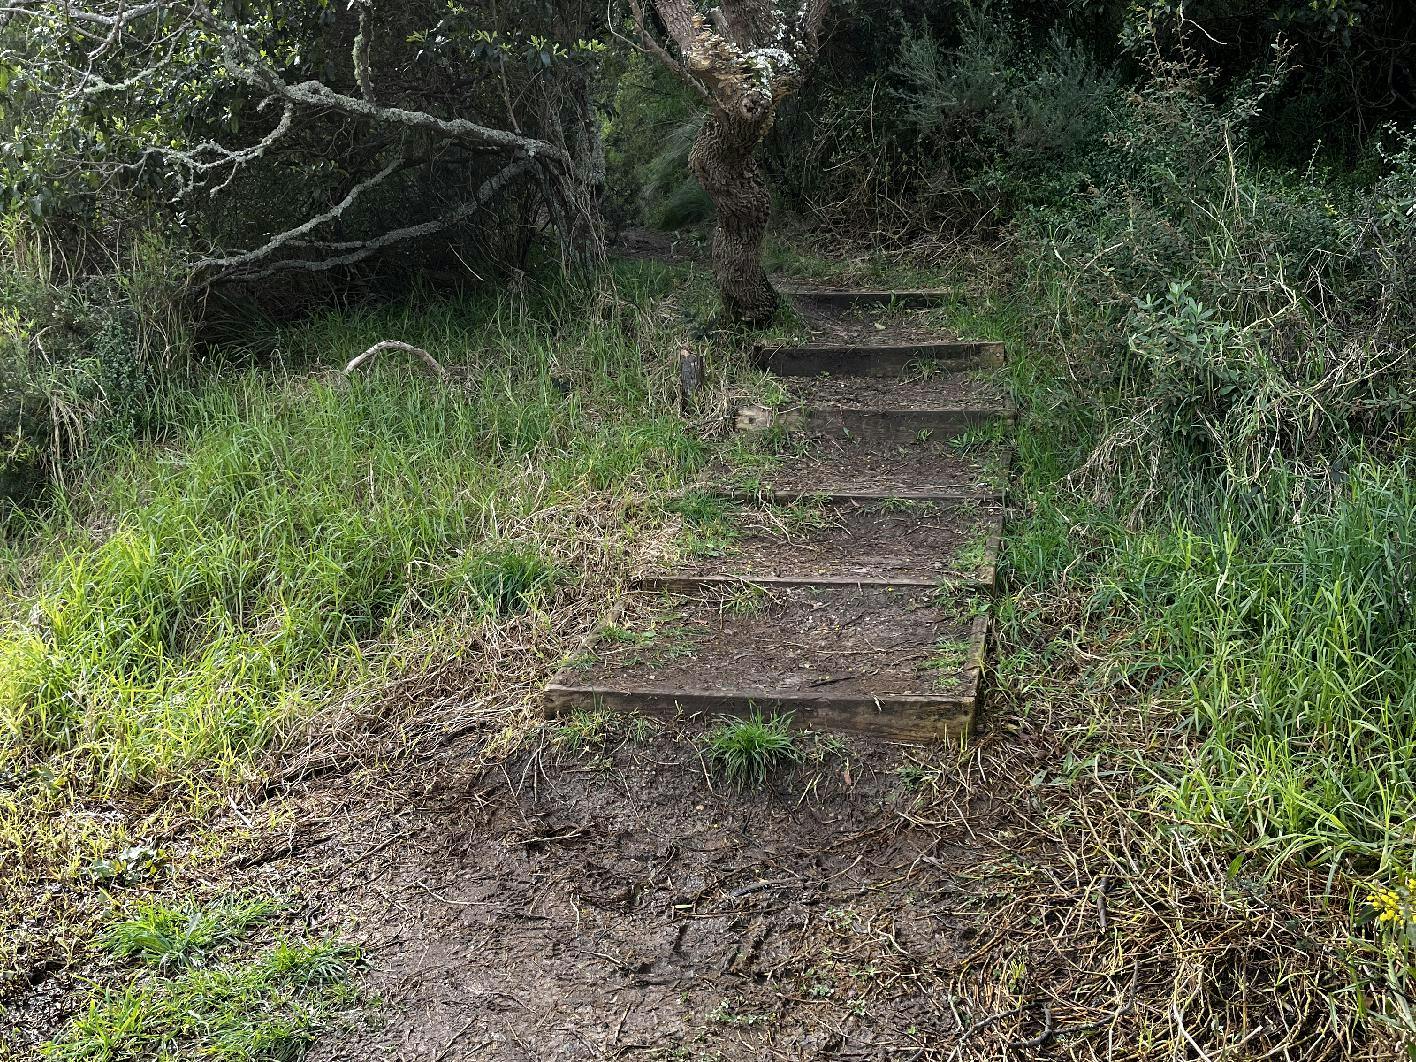 Looking up - the existing steps at the start of the trail will be upgraded.